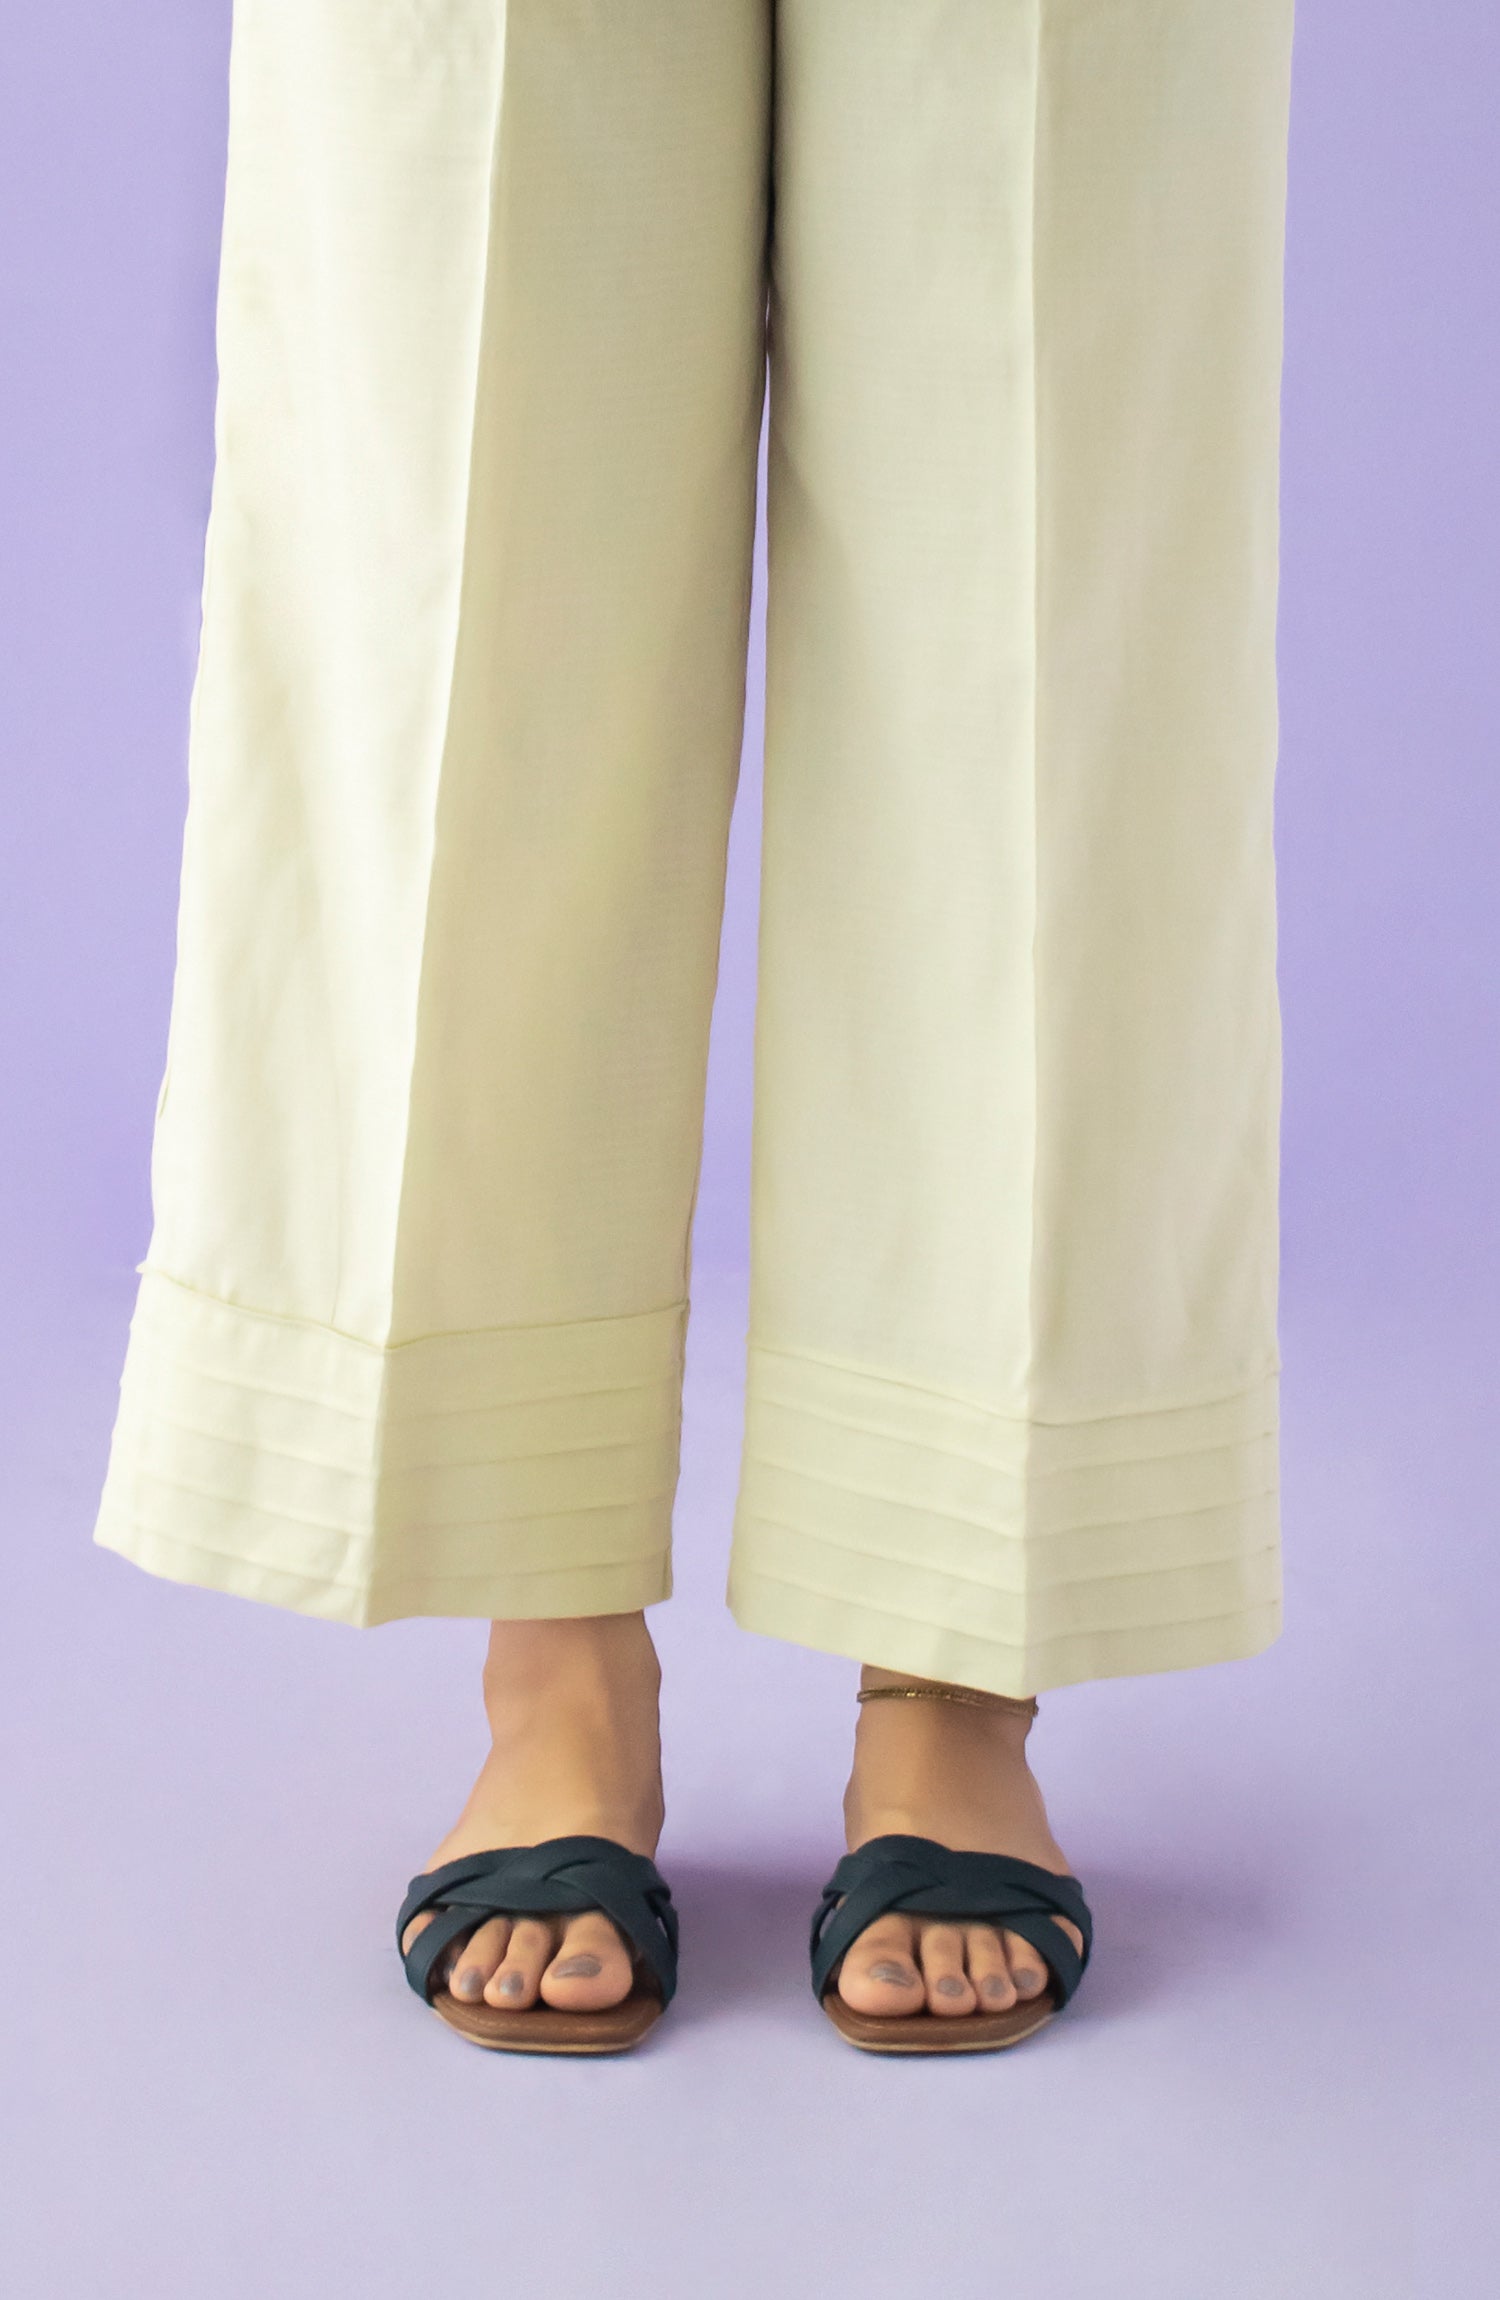 NB-T-PL-23-012 CREAM DOBBY SCTROUSER STITCHED BOTTOMS TROUSER